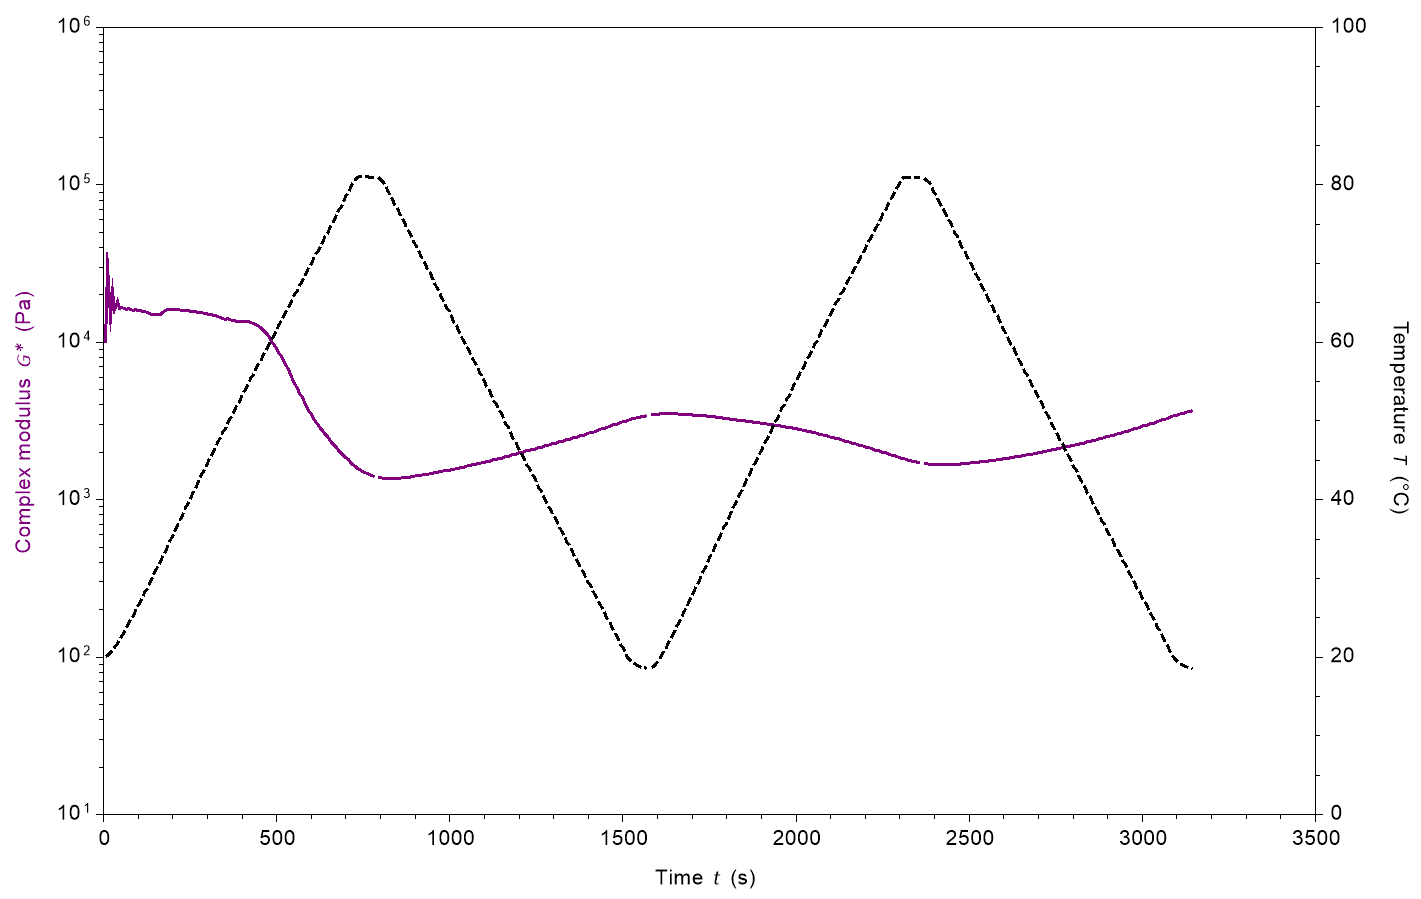 plot for vegan cheddar showing change in complex modulus with temperature ramps